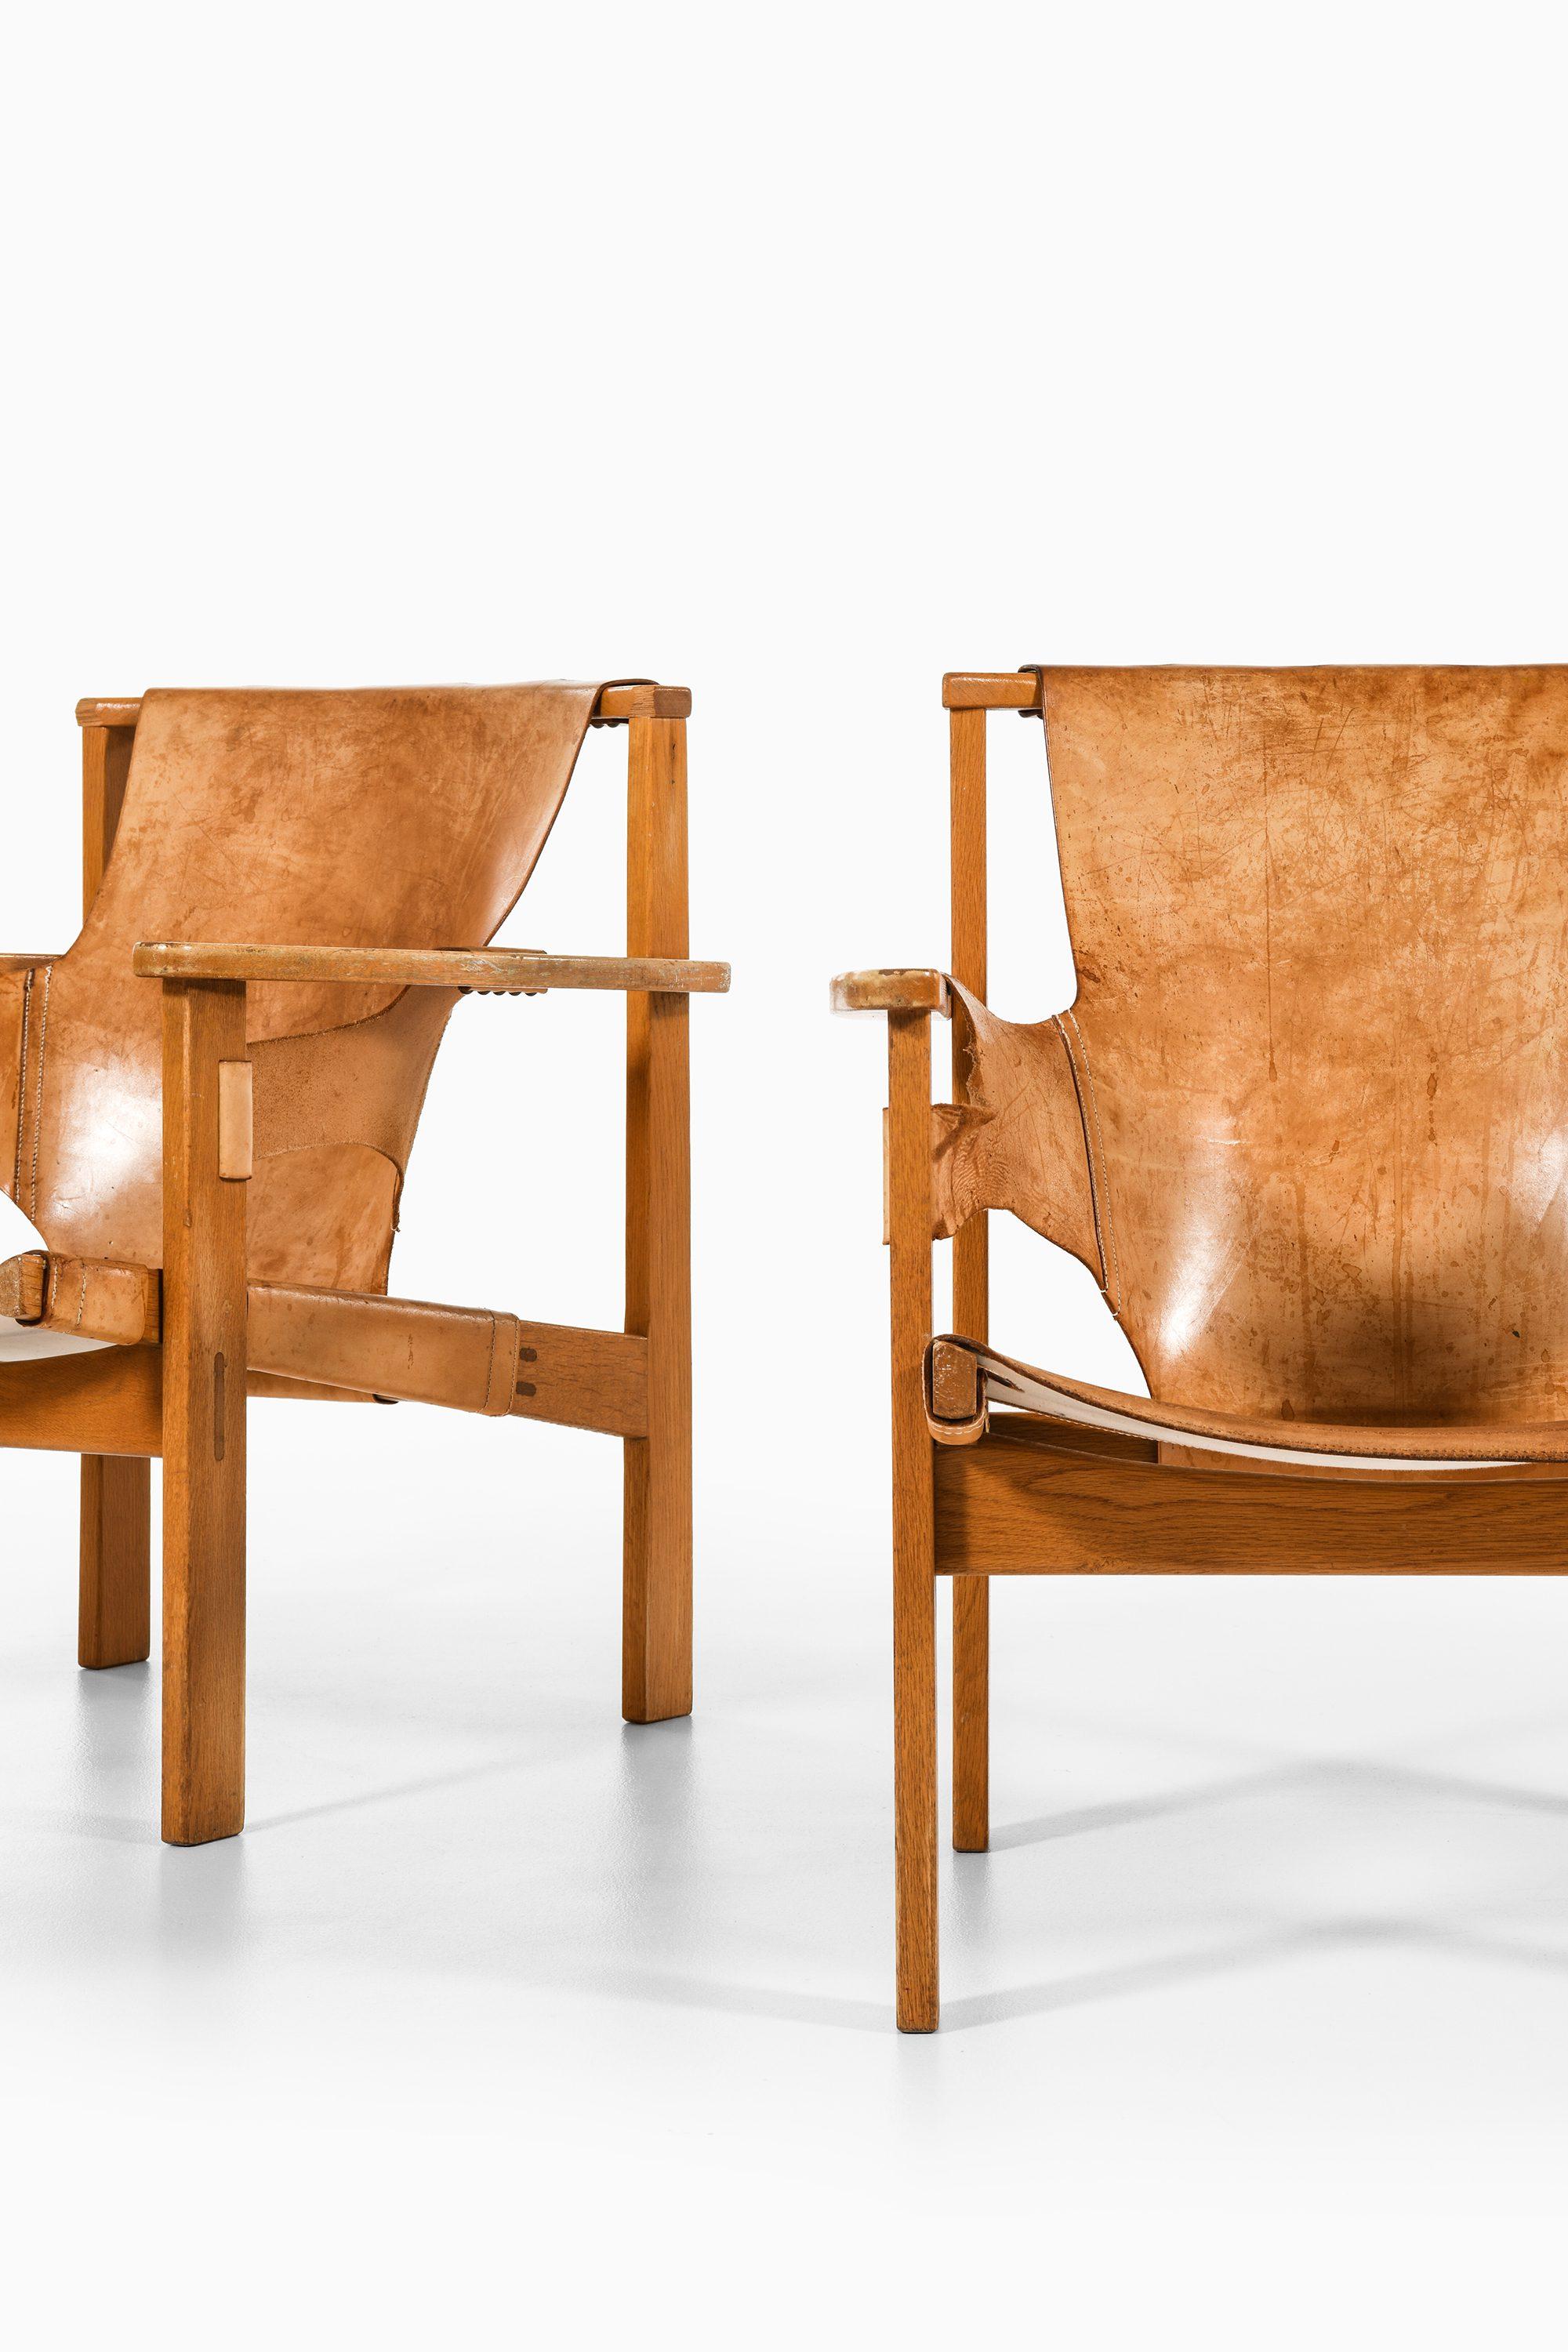 20th Century Pair of Trienna Easy Chairs in Oak & Original Leather by Carl-Axel Acking, 1957 For Sale